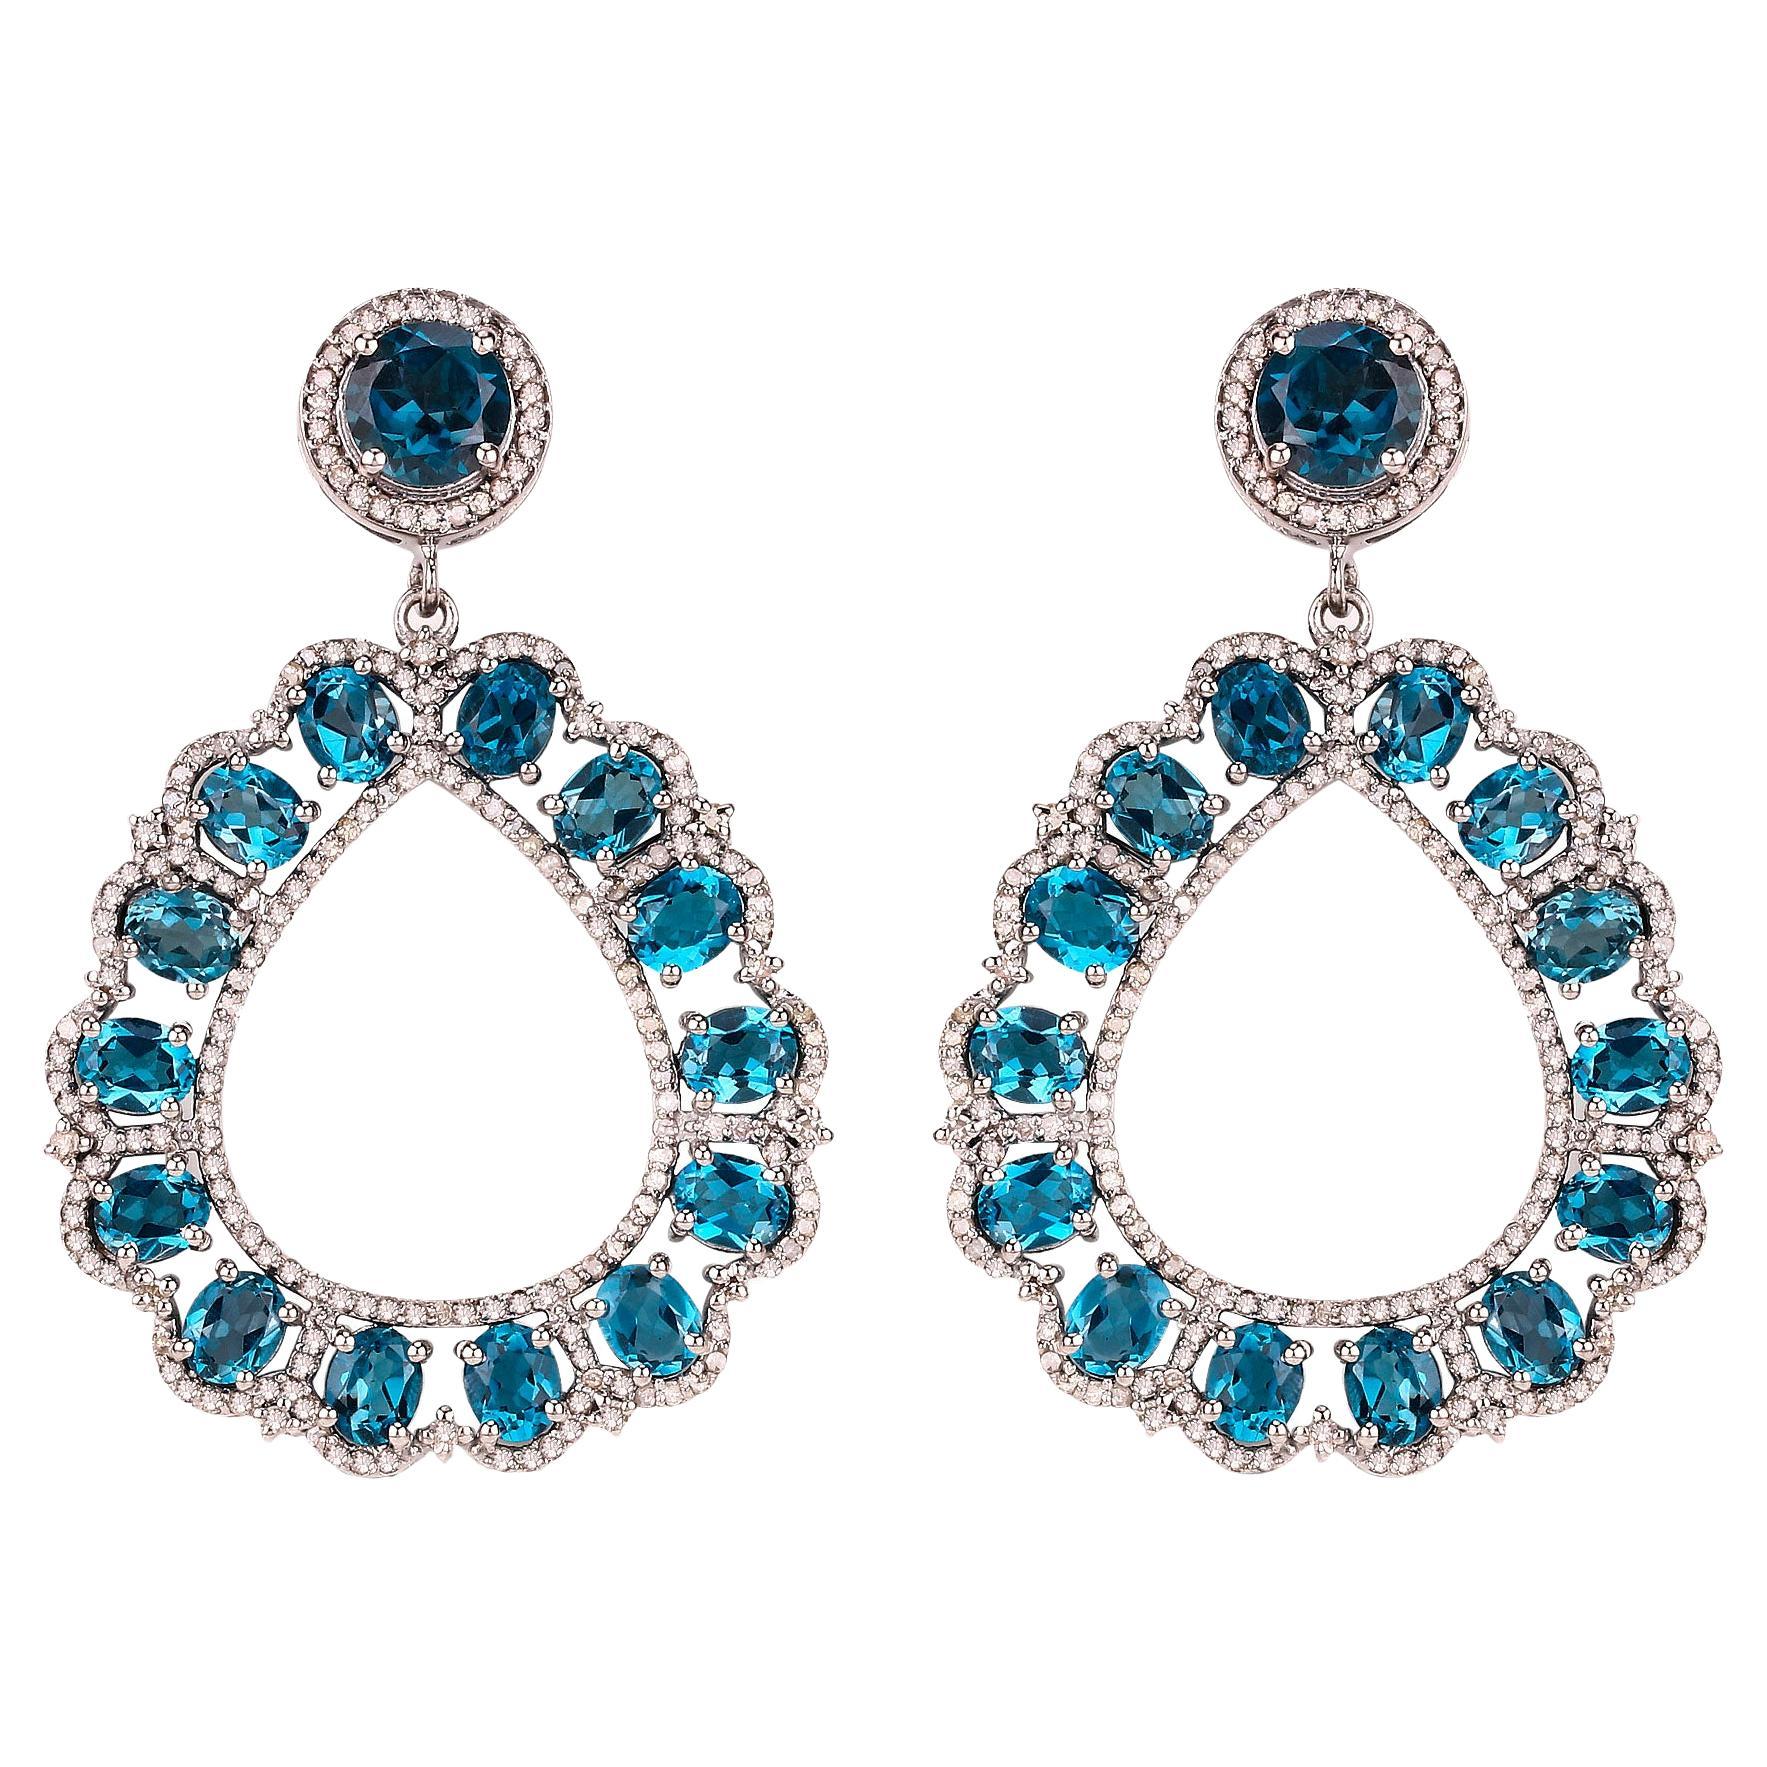 London Blue Topaz Dangle Earrings With Diamonds 15.52 Carats Sterling Silver For Sale